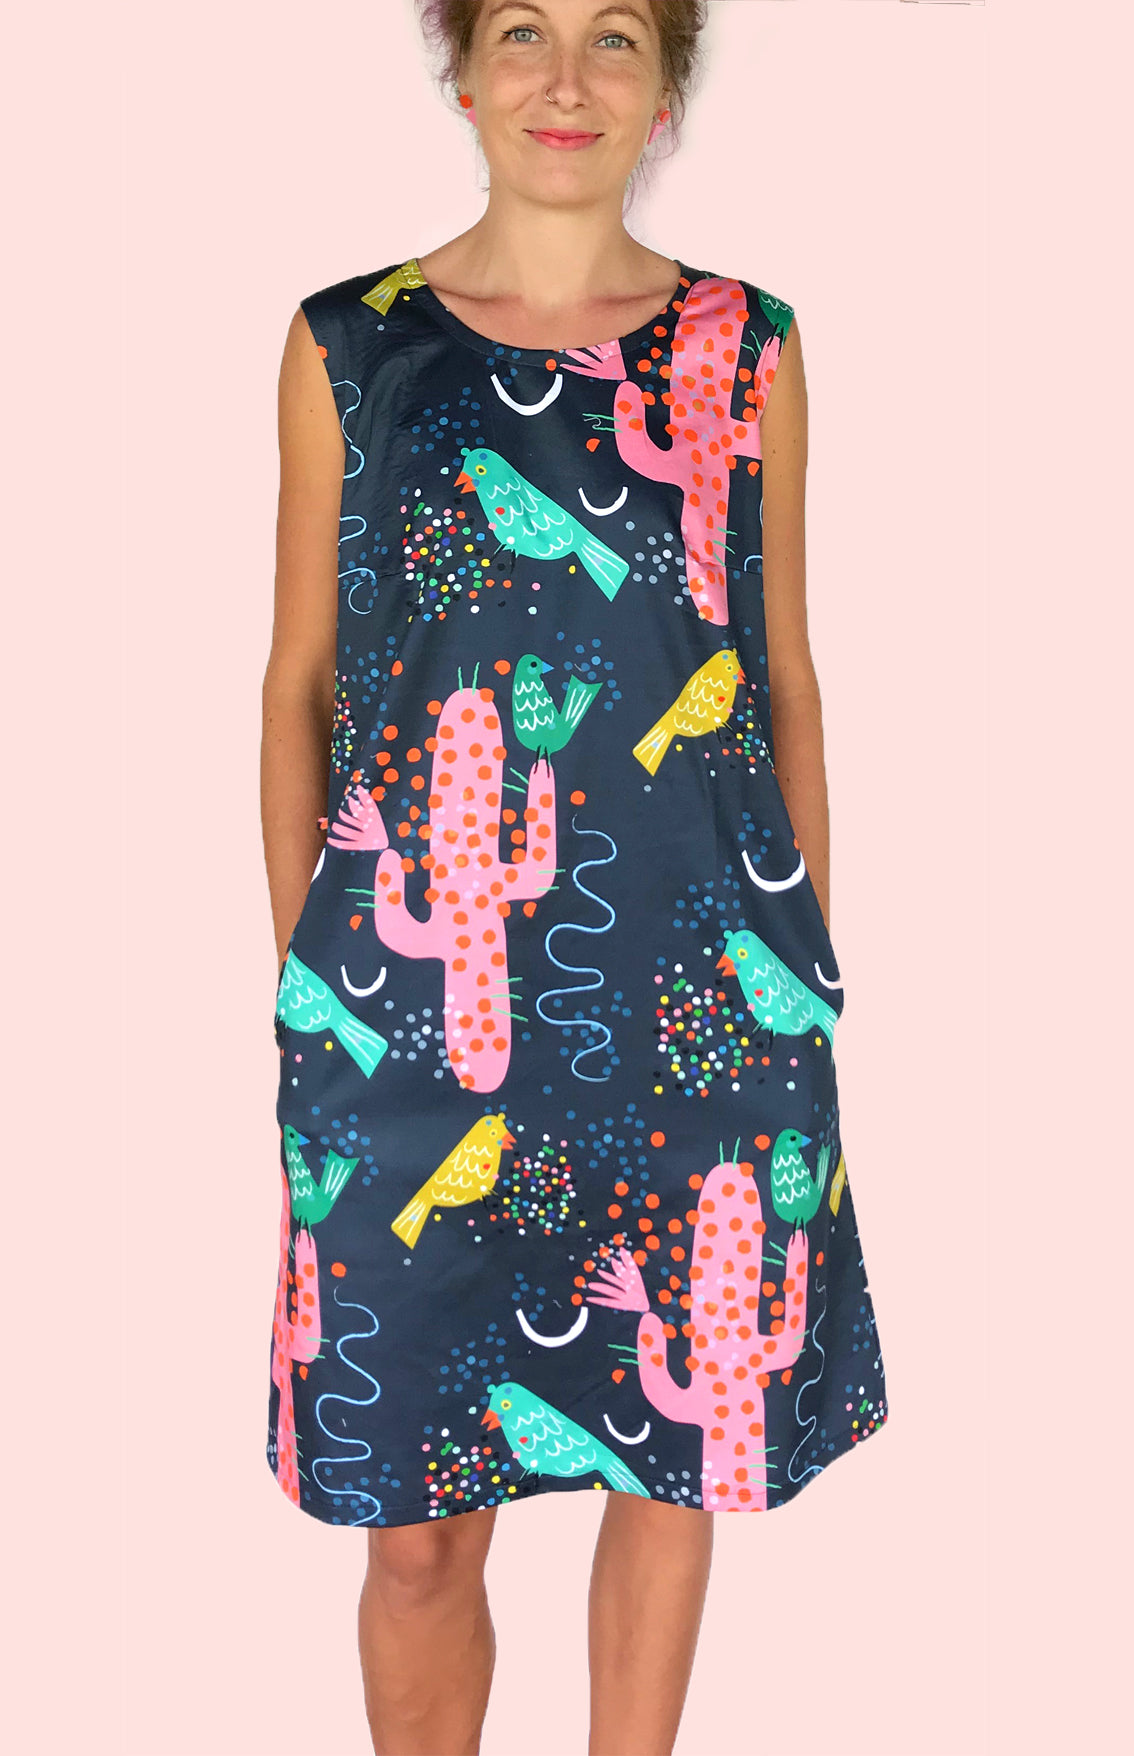 Prickly Feathers 100% organic cotton dress (550882443294)